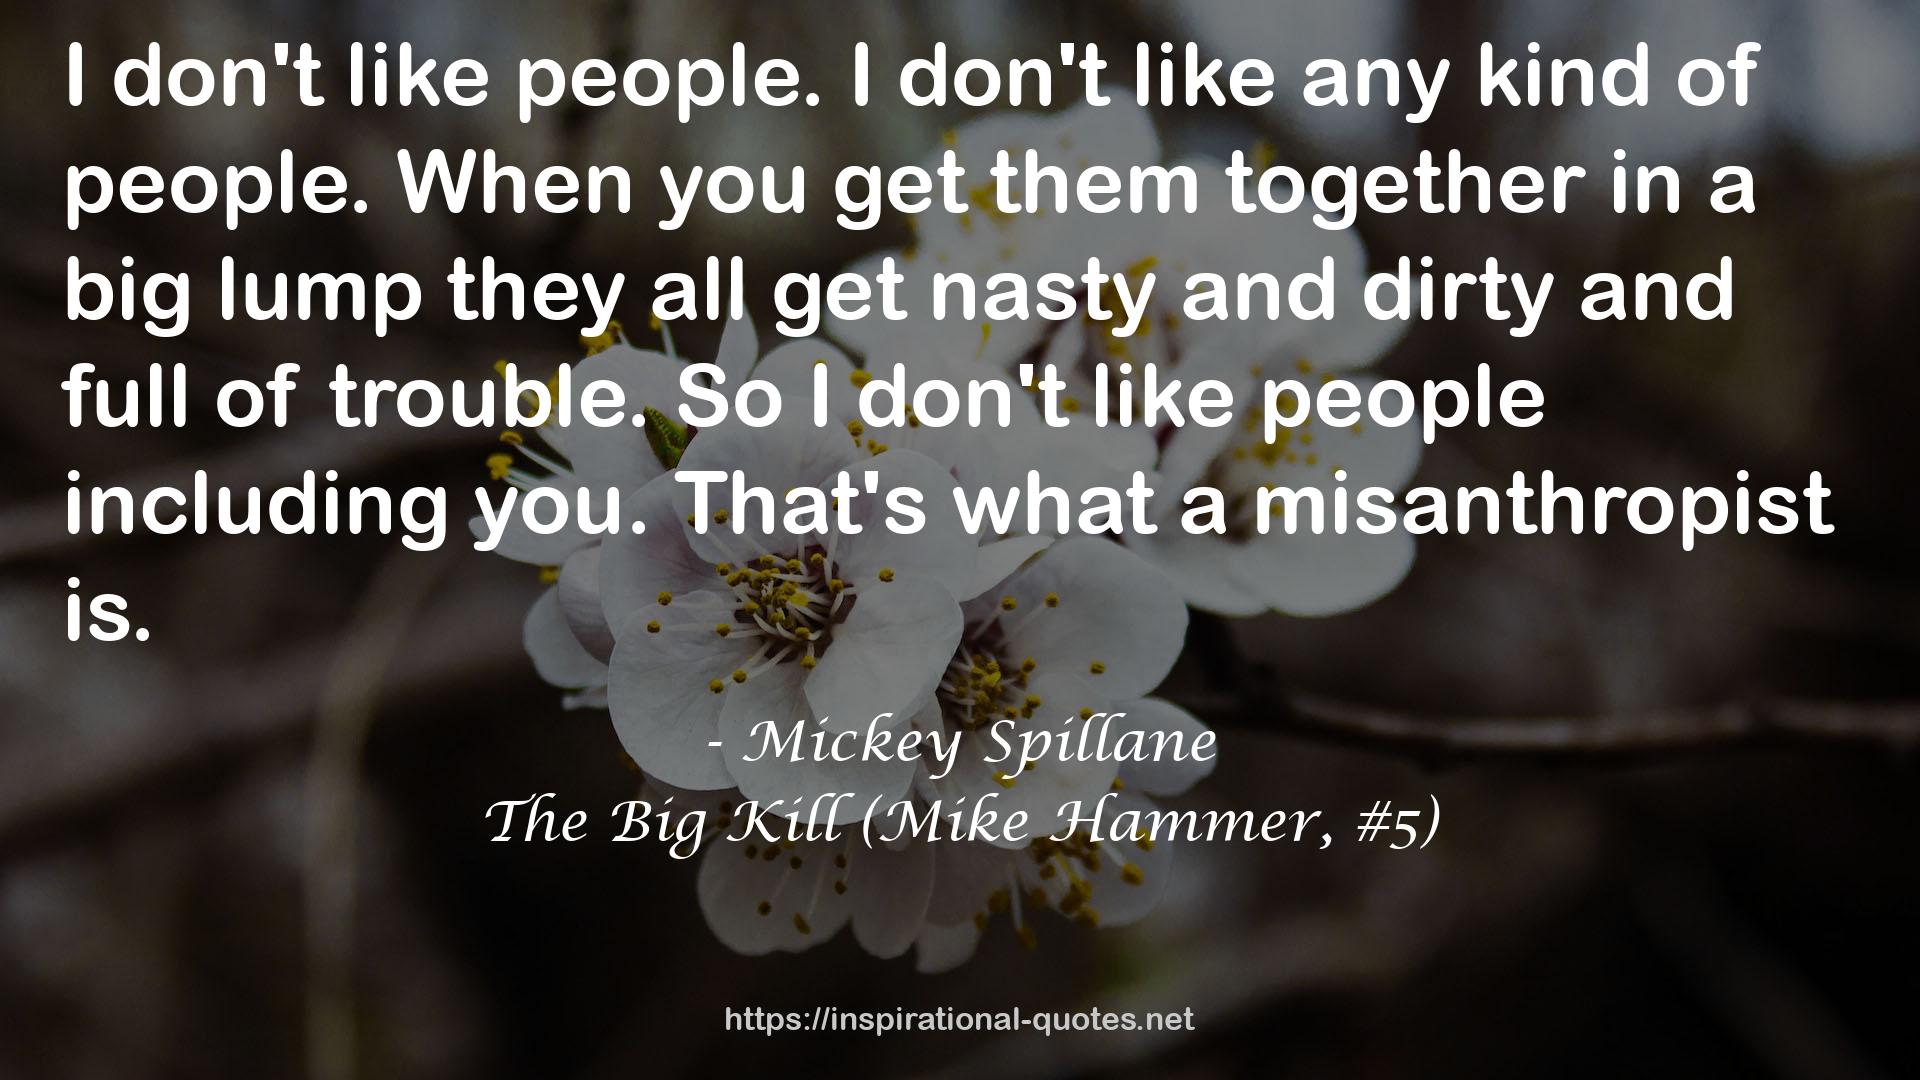 The Big Kill (Mike Hammer, #5) QUOTES